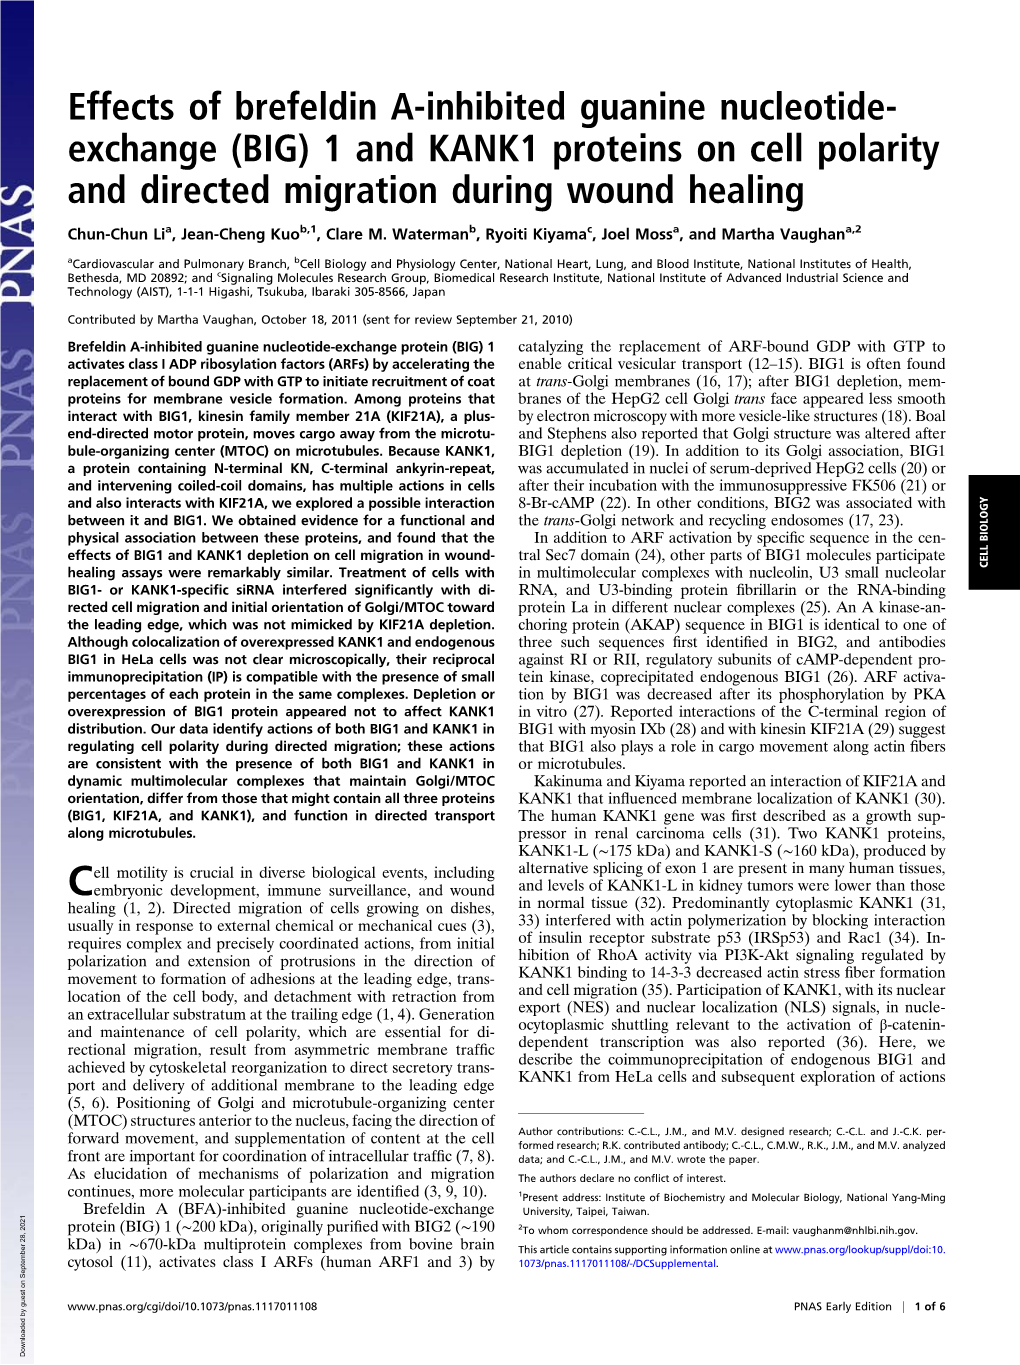 1 and KANK1 Proteins on Cell Polarity and Directed Migration During Wound Healing